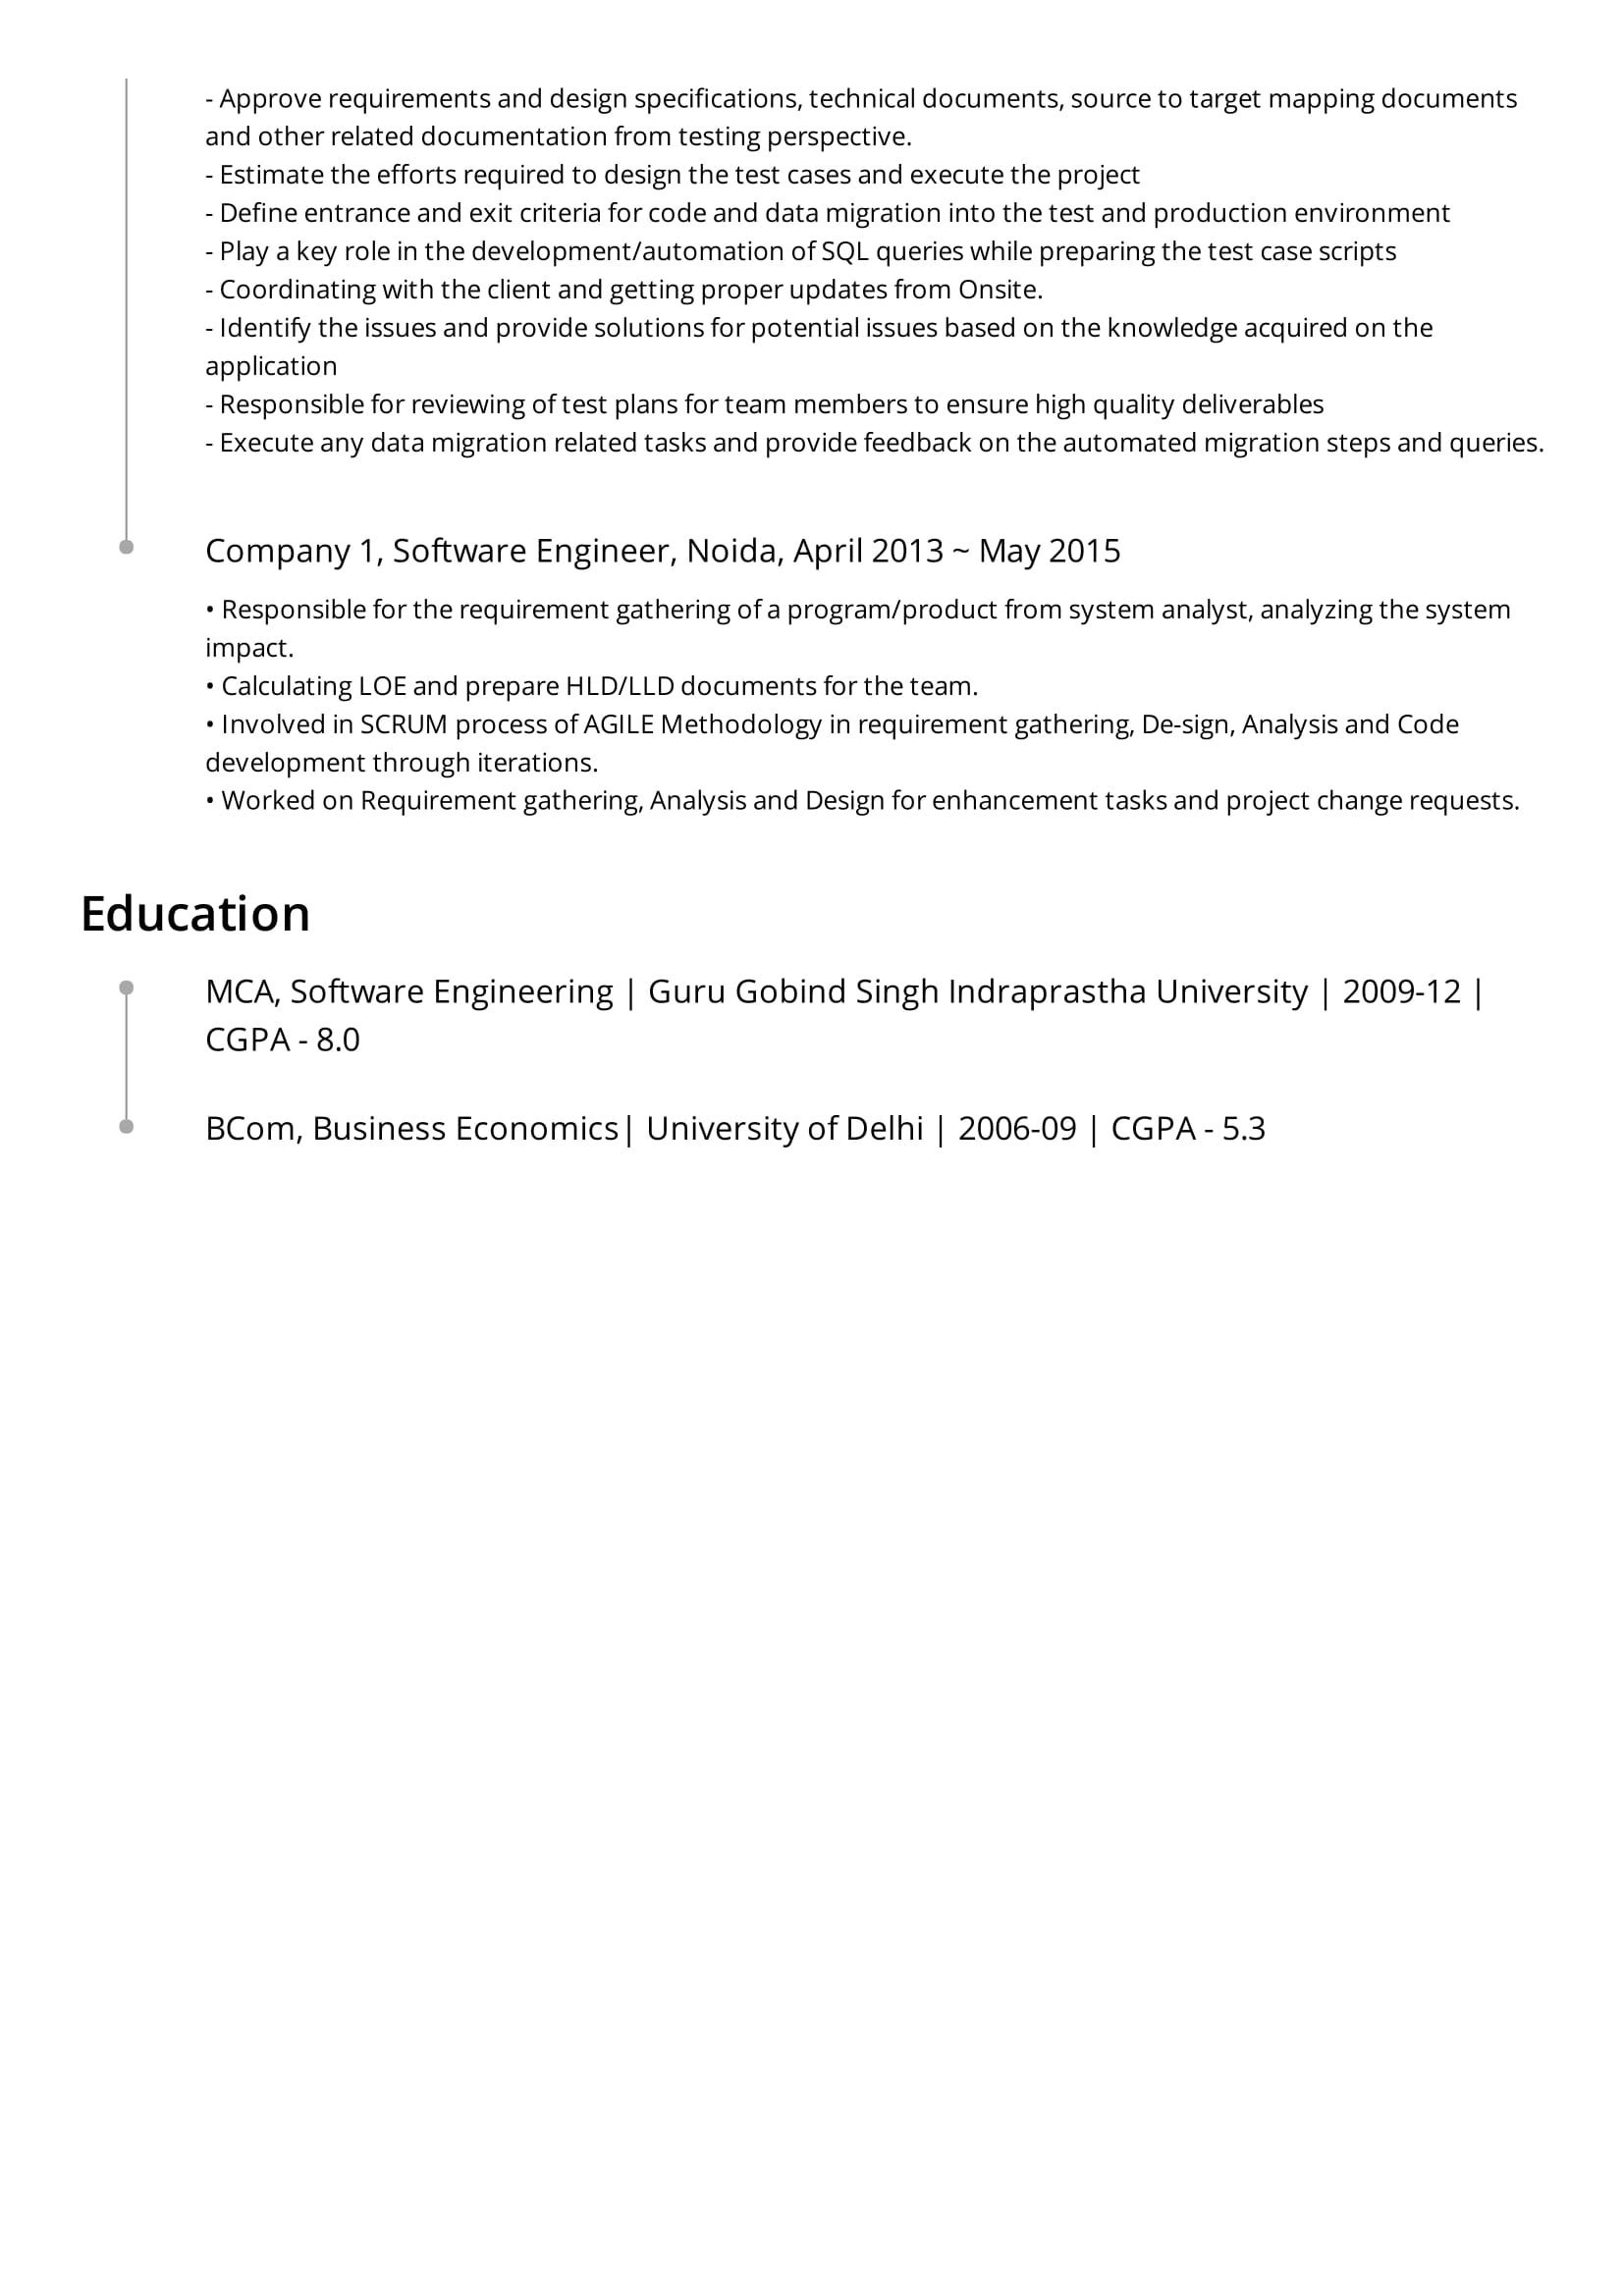 Business Analyst with Hld and Lld Sample Resume Looking for Feedback On My Data Engineer Resume to Get My 2nd Job …